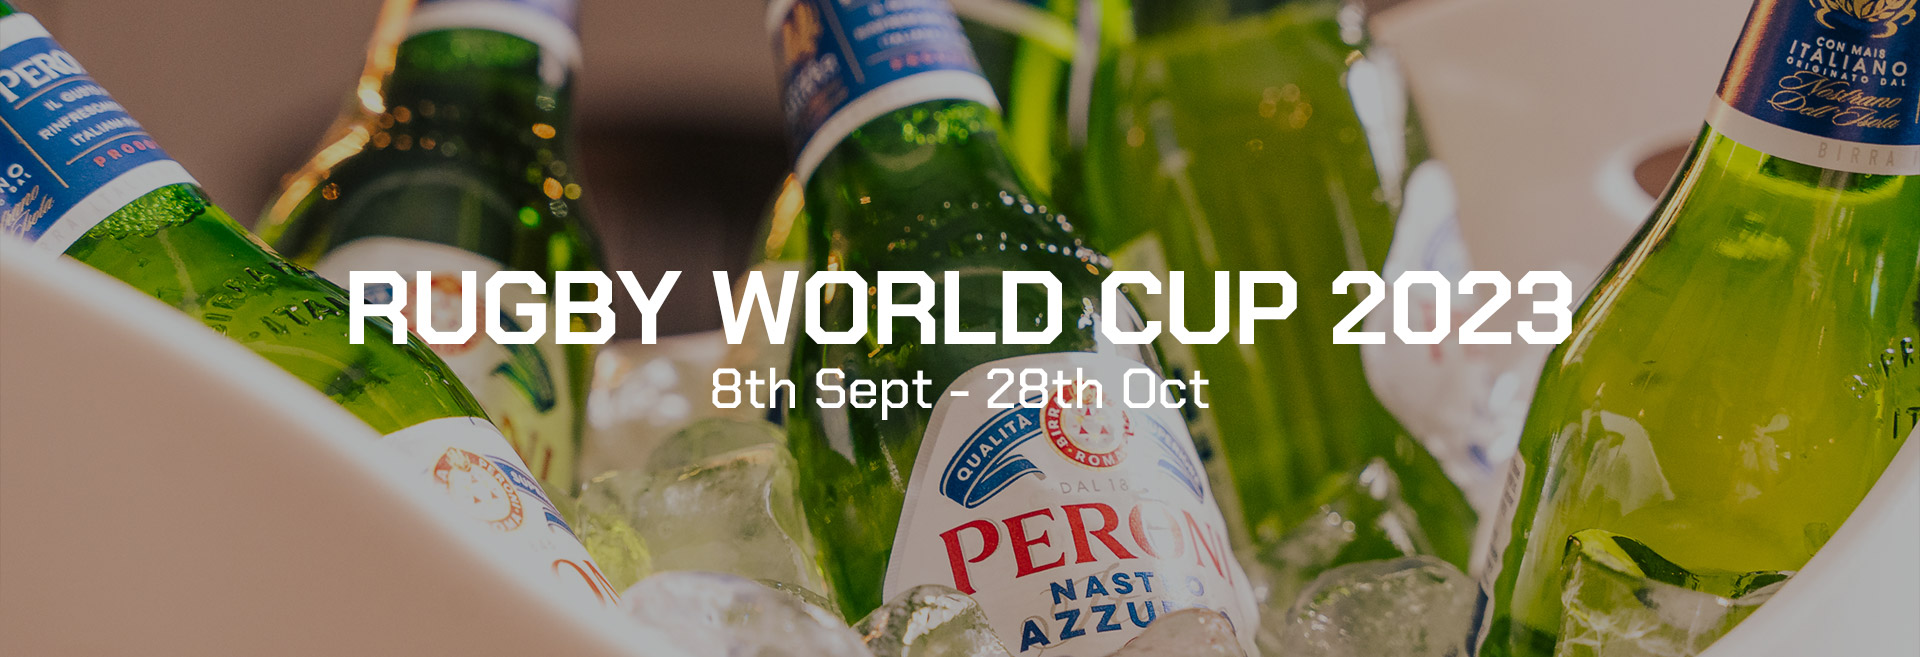 Watch the Rugby World Cup at The Sindercombe Social